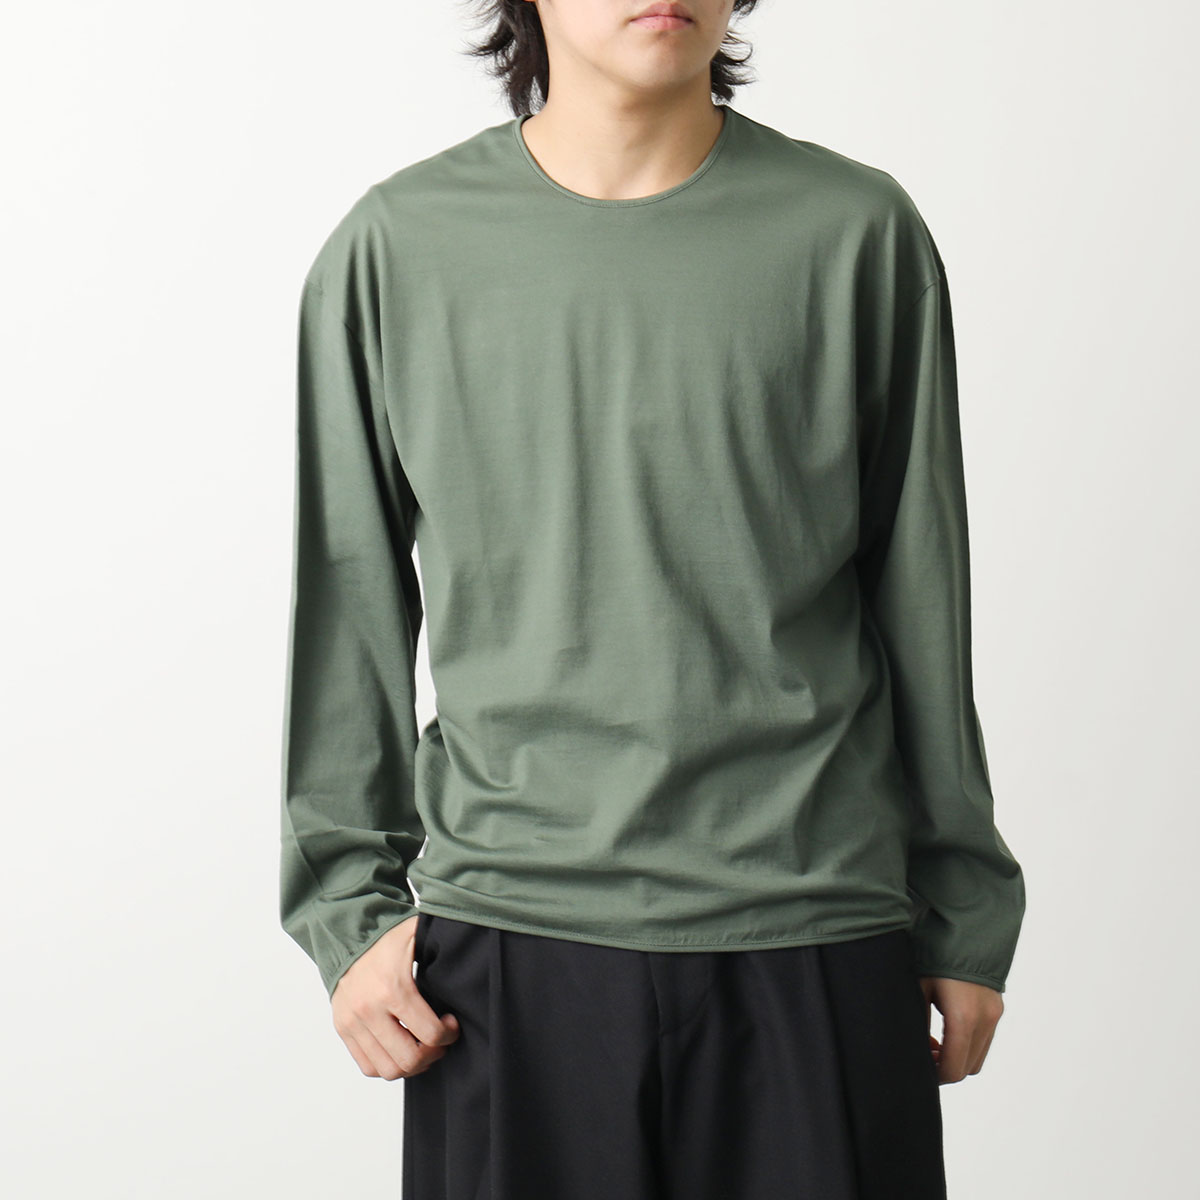 Lemaire ルメール Tシャツ LS RELAXED TEE TO1182 LJ1018 メンズ 長袖 カットソー クルーネック コットン カラー2色｜s-musee｜03